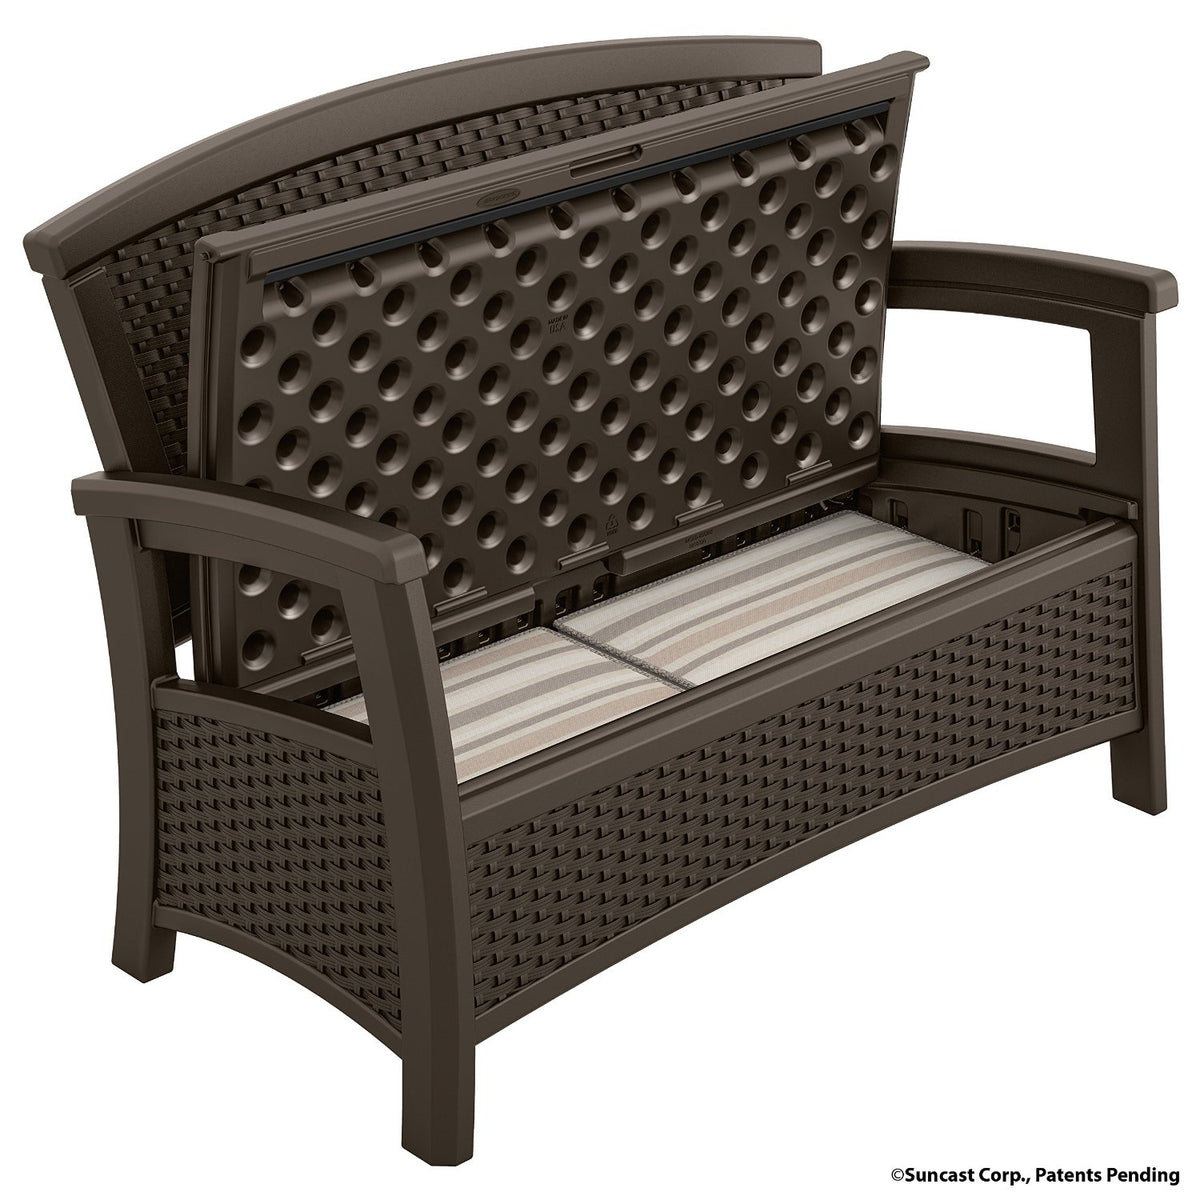 buy outdoor storage benches at cheap rate in bulk. wholesale & retail outdoor furniture & grills store.